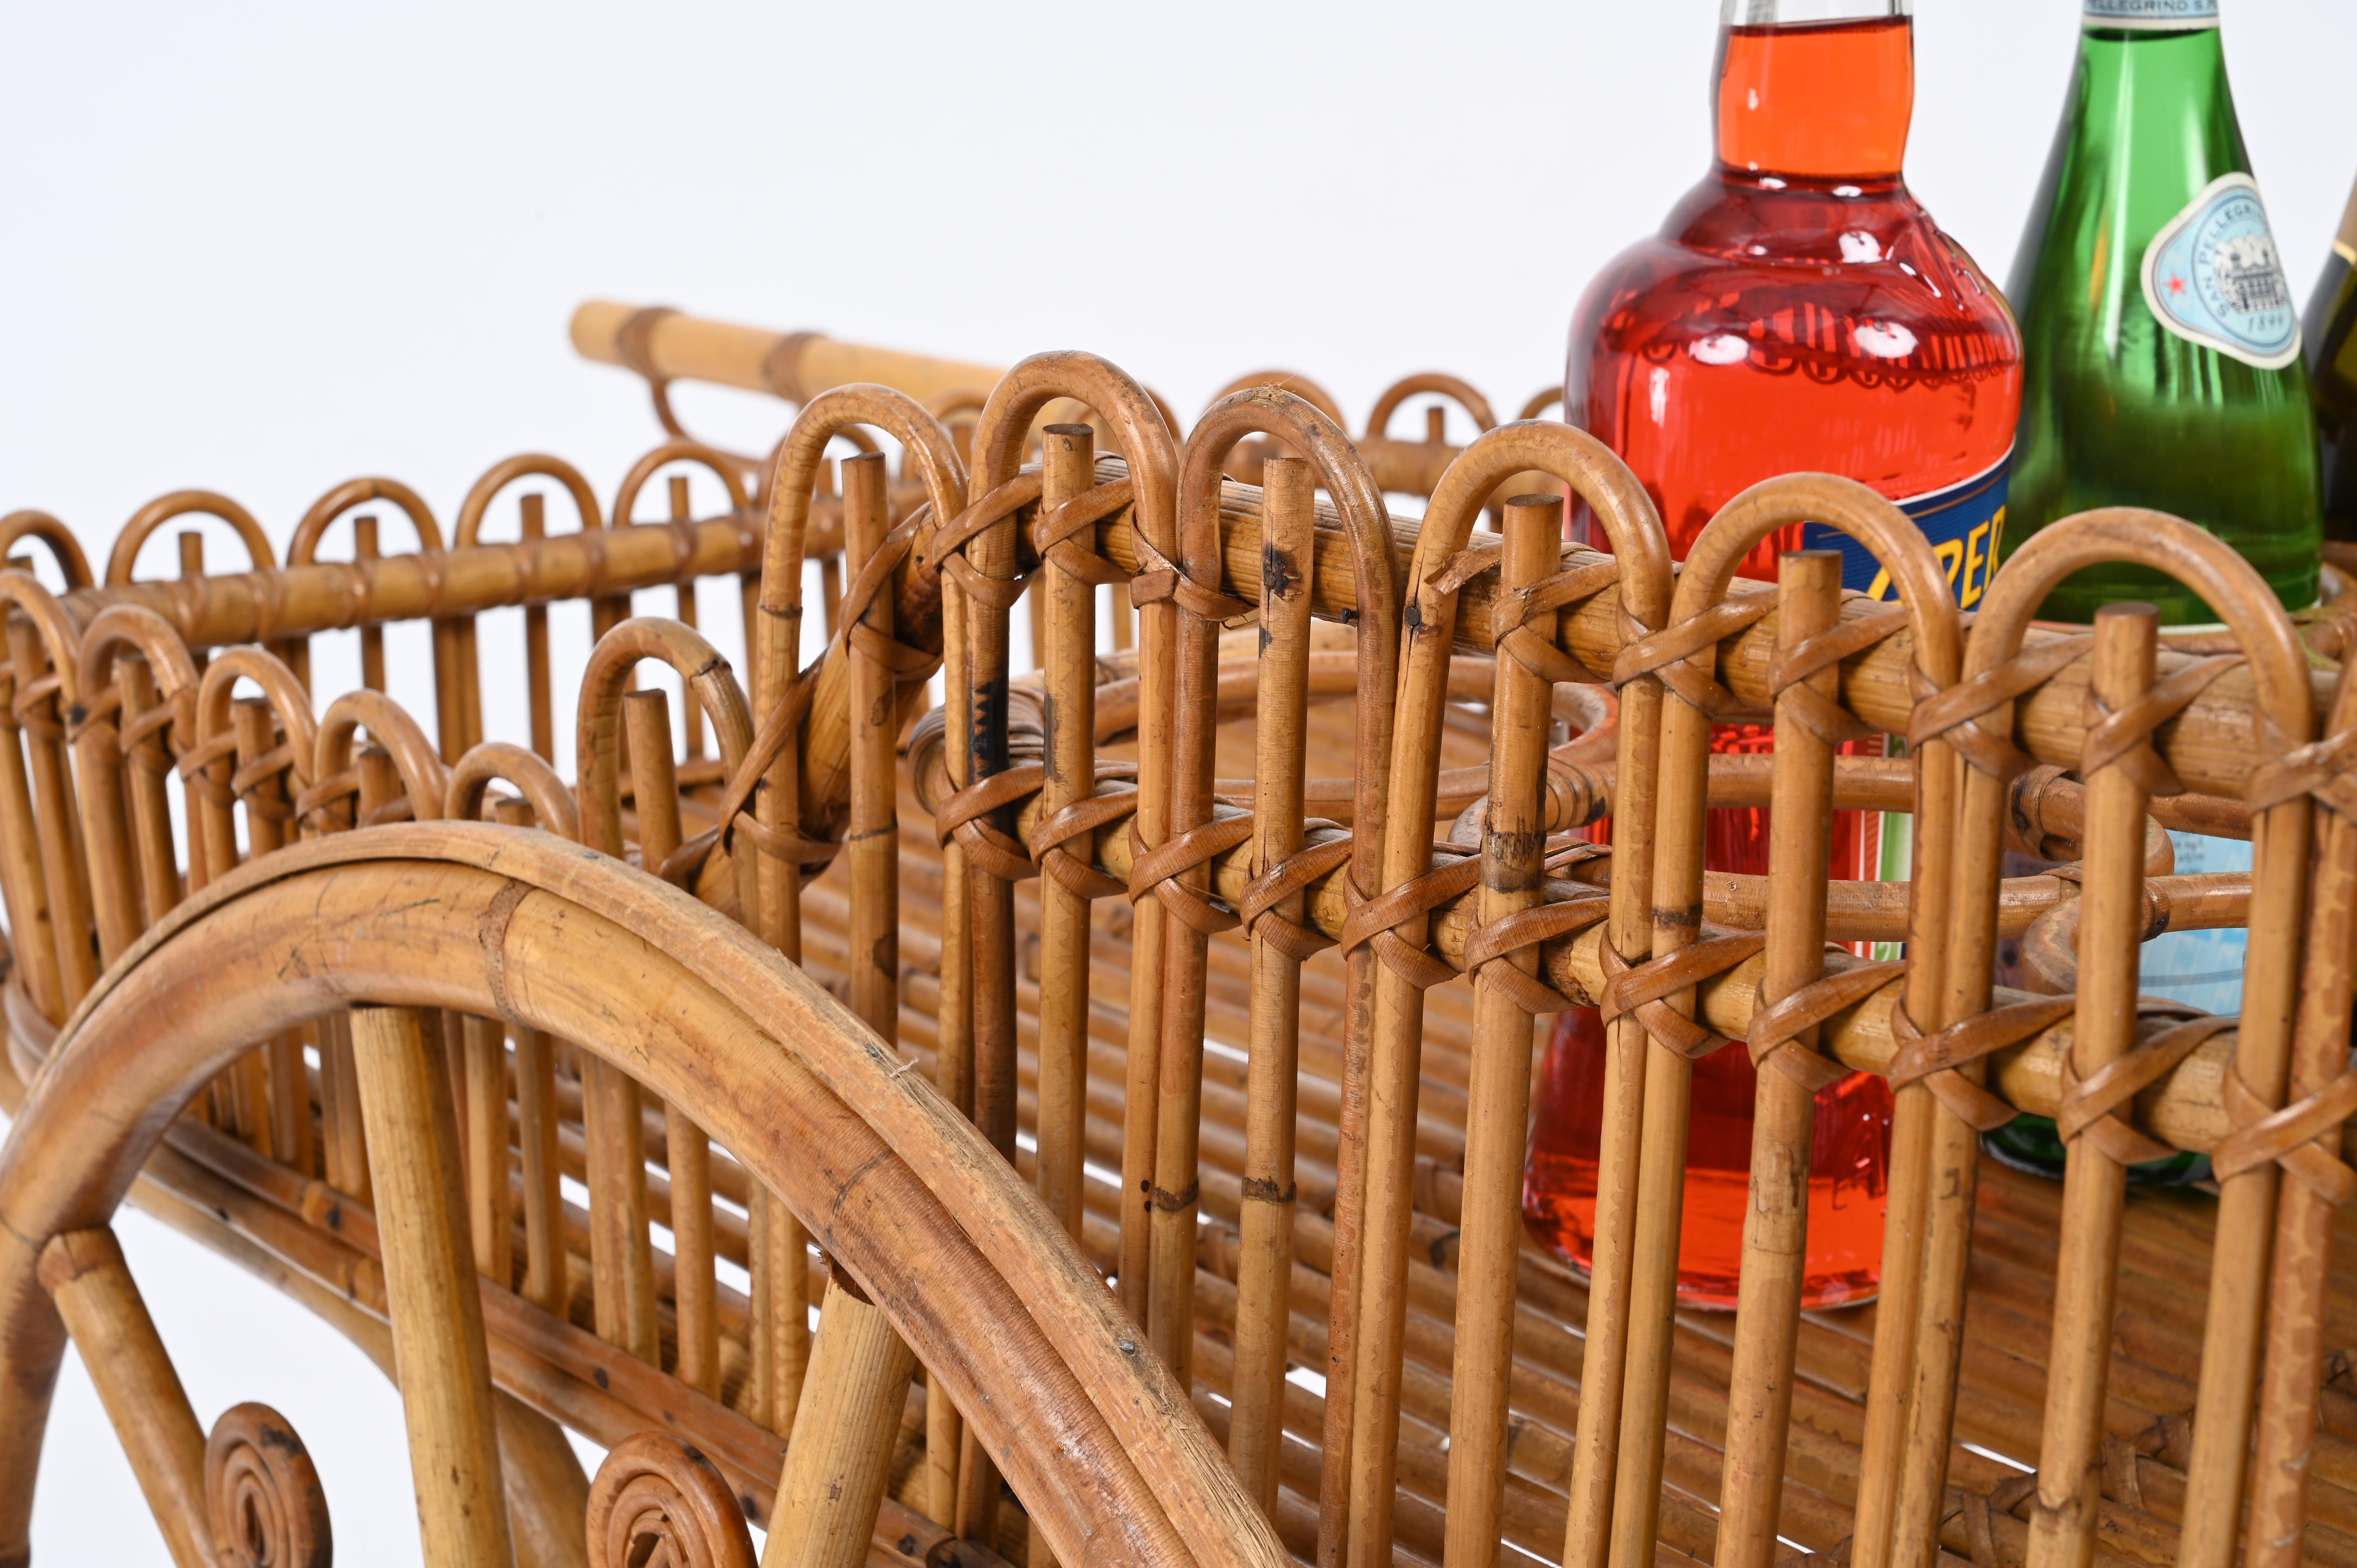 Mid-20th Century French Riviera Serving Bar Cart in Rattan, Bamboo and Wicker, Italy 1960s For Sale